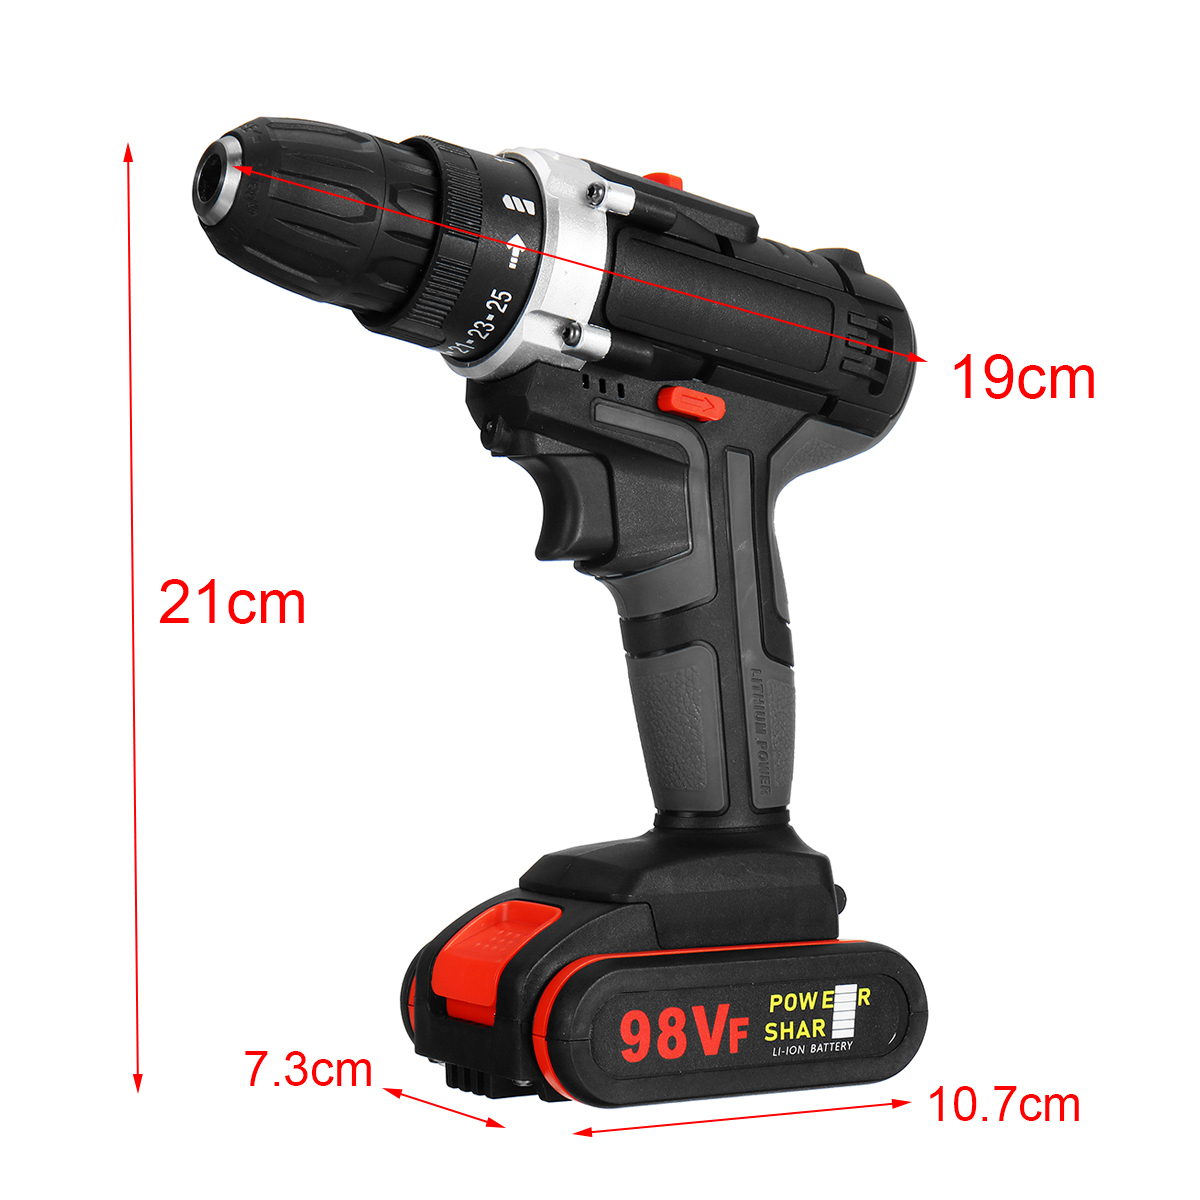 98VF-Cordless-Electric-Impact-Drill-Screwdriver-251-Torque-Rechargeable-Household-Screwdriver-1764622-7